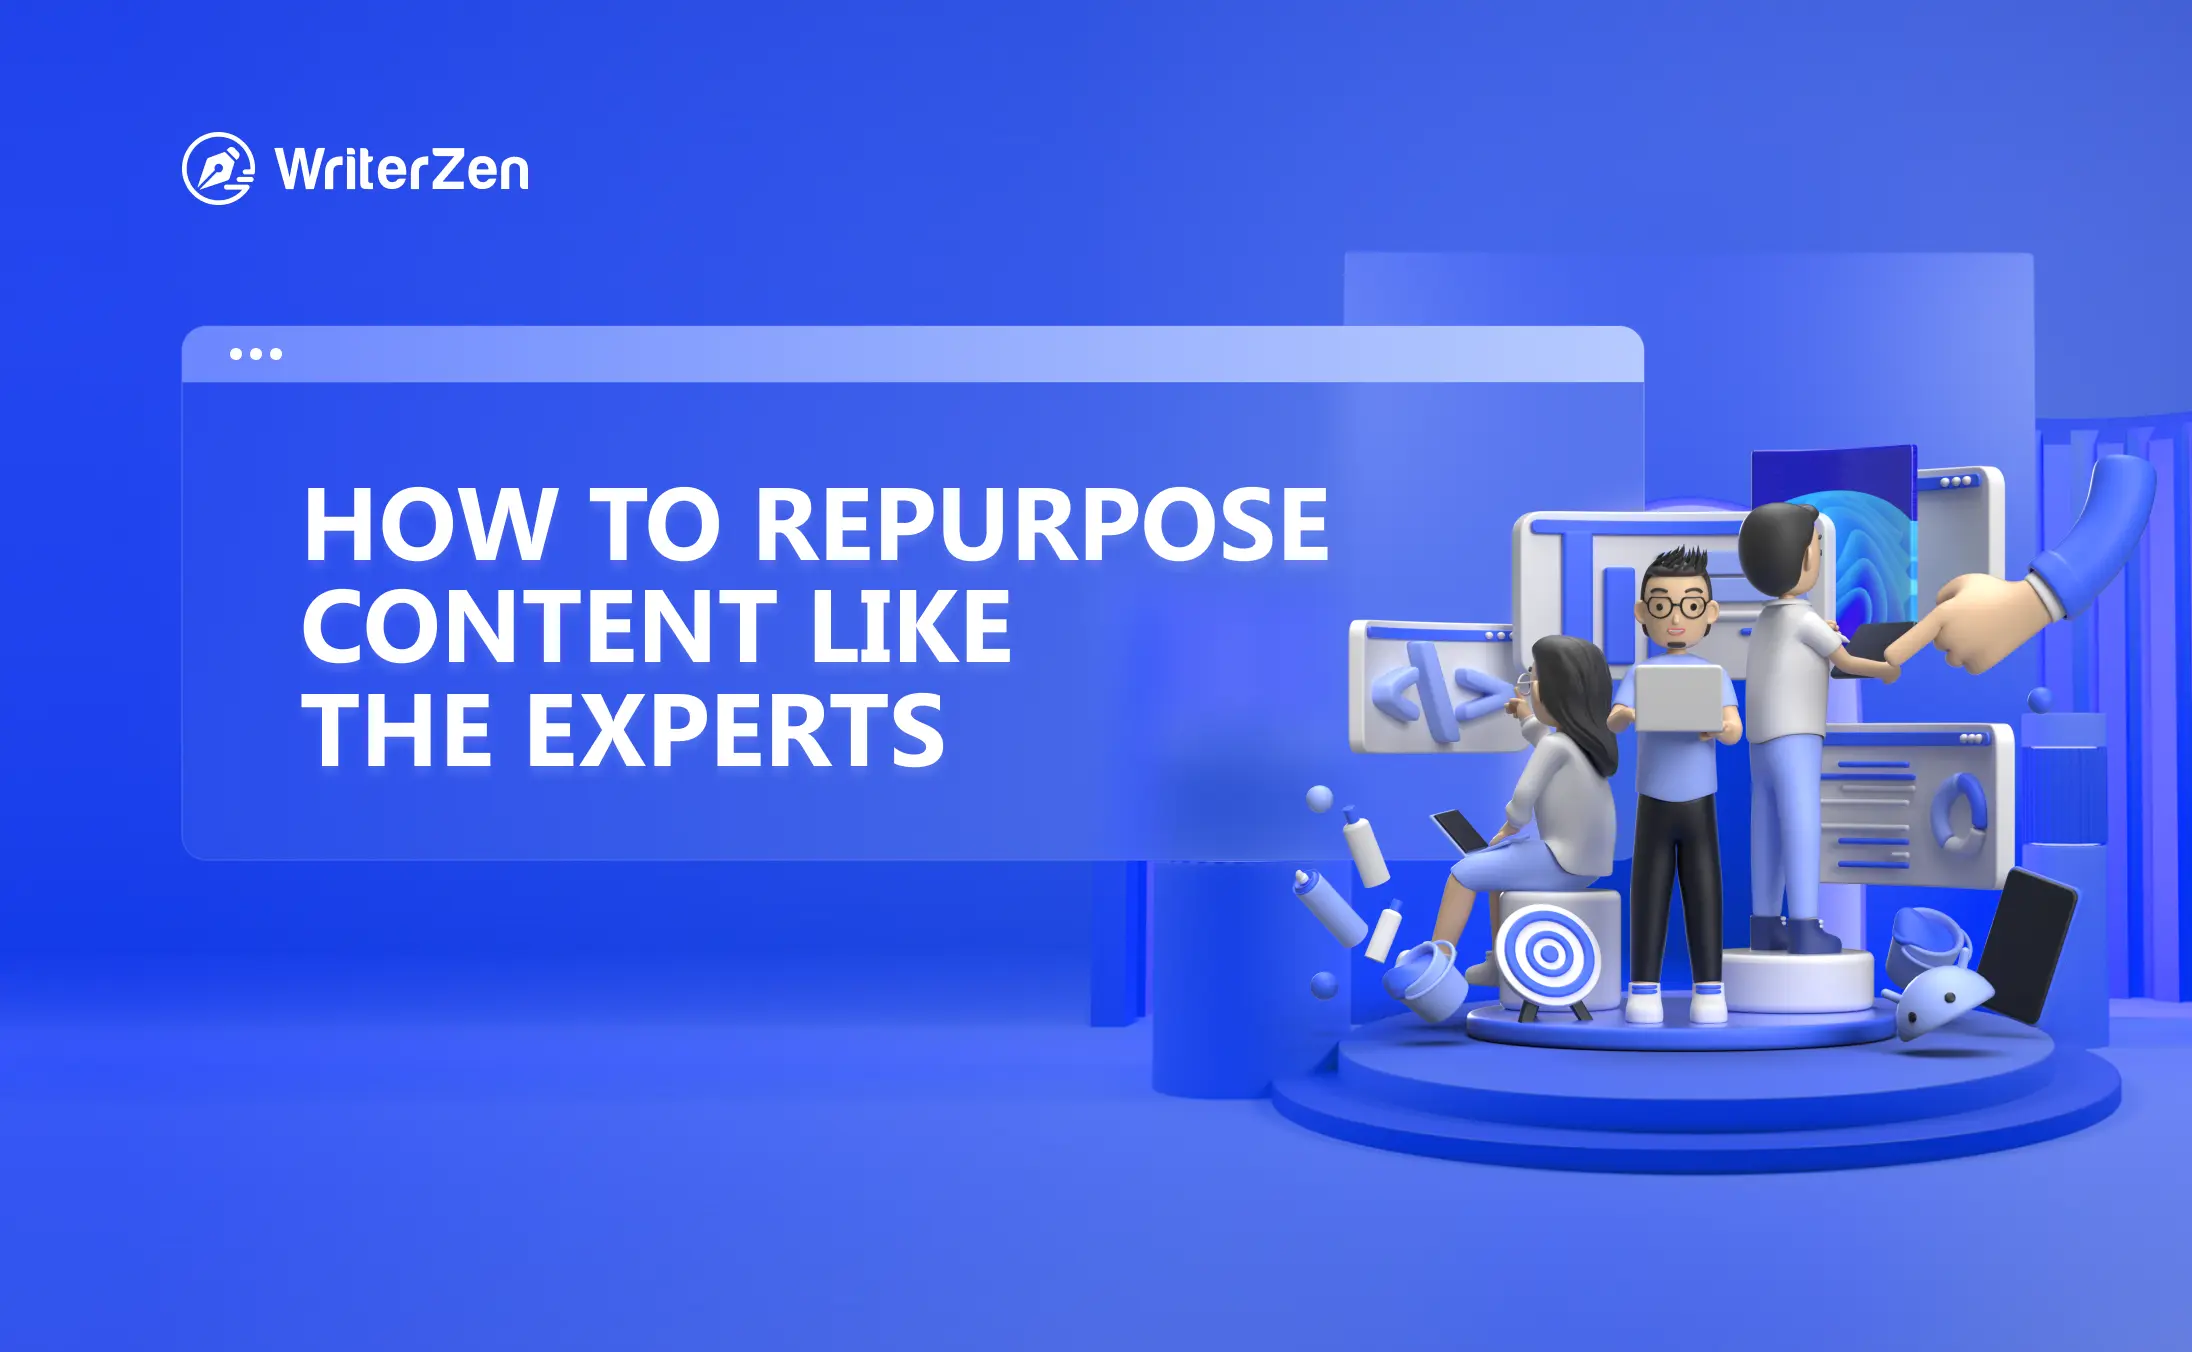 How to Repurpose Content Like the Experts